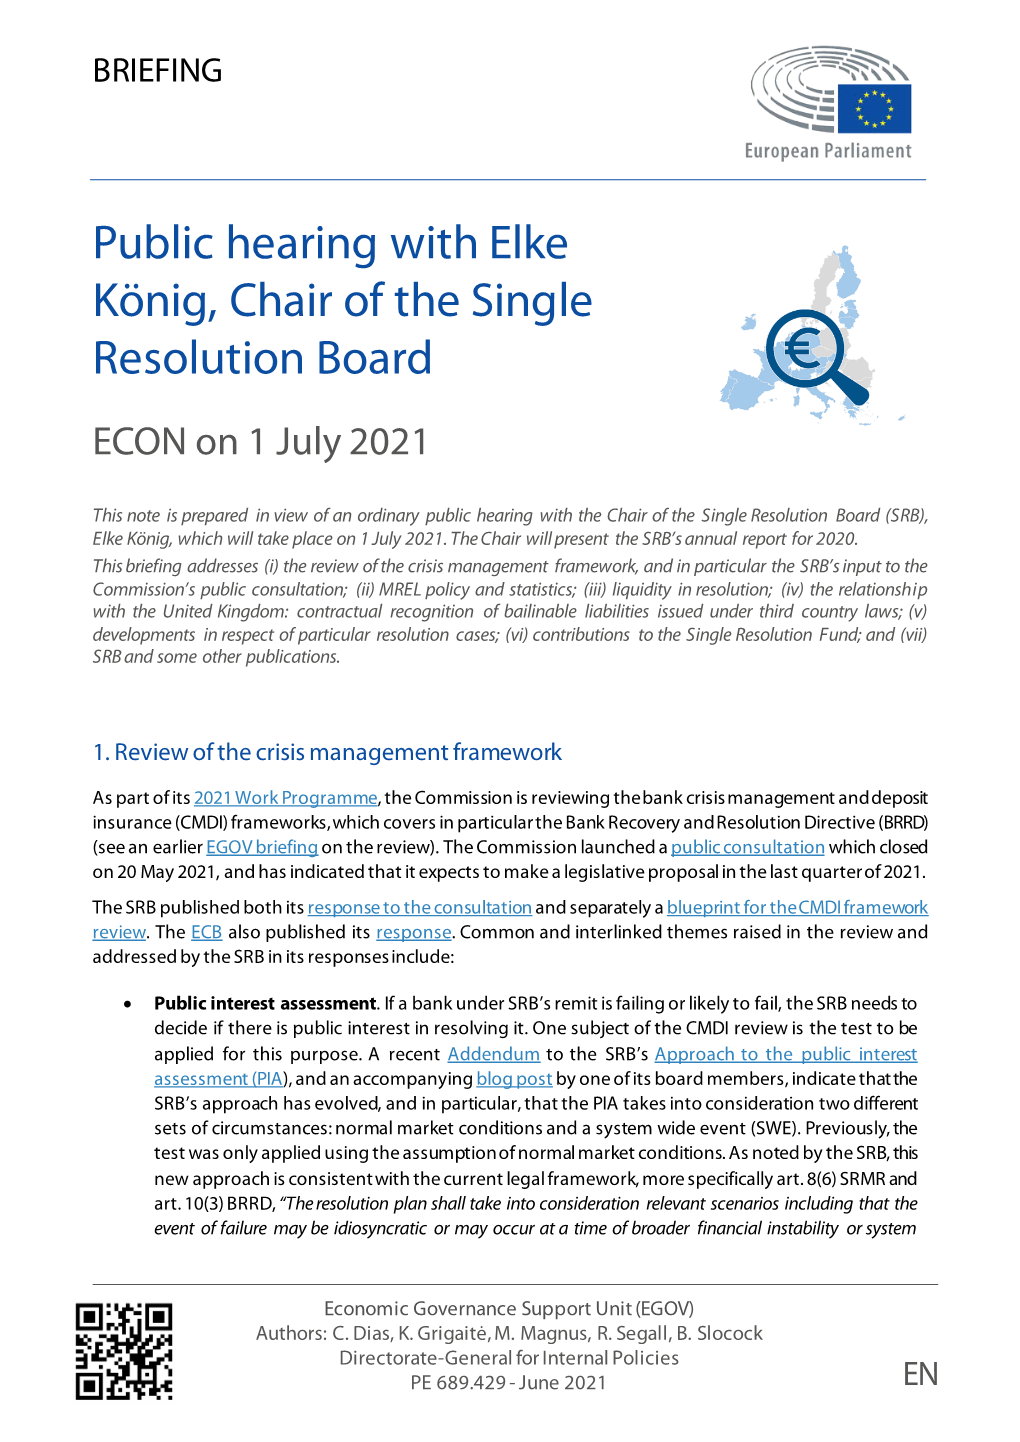 Public Hearing with Elke König, Chair of the Single Resolution Board ECON on 1 July 2021